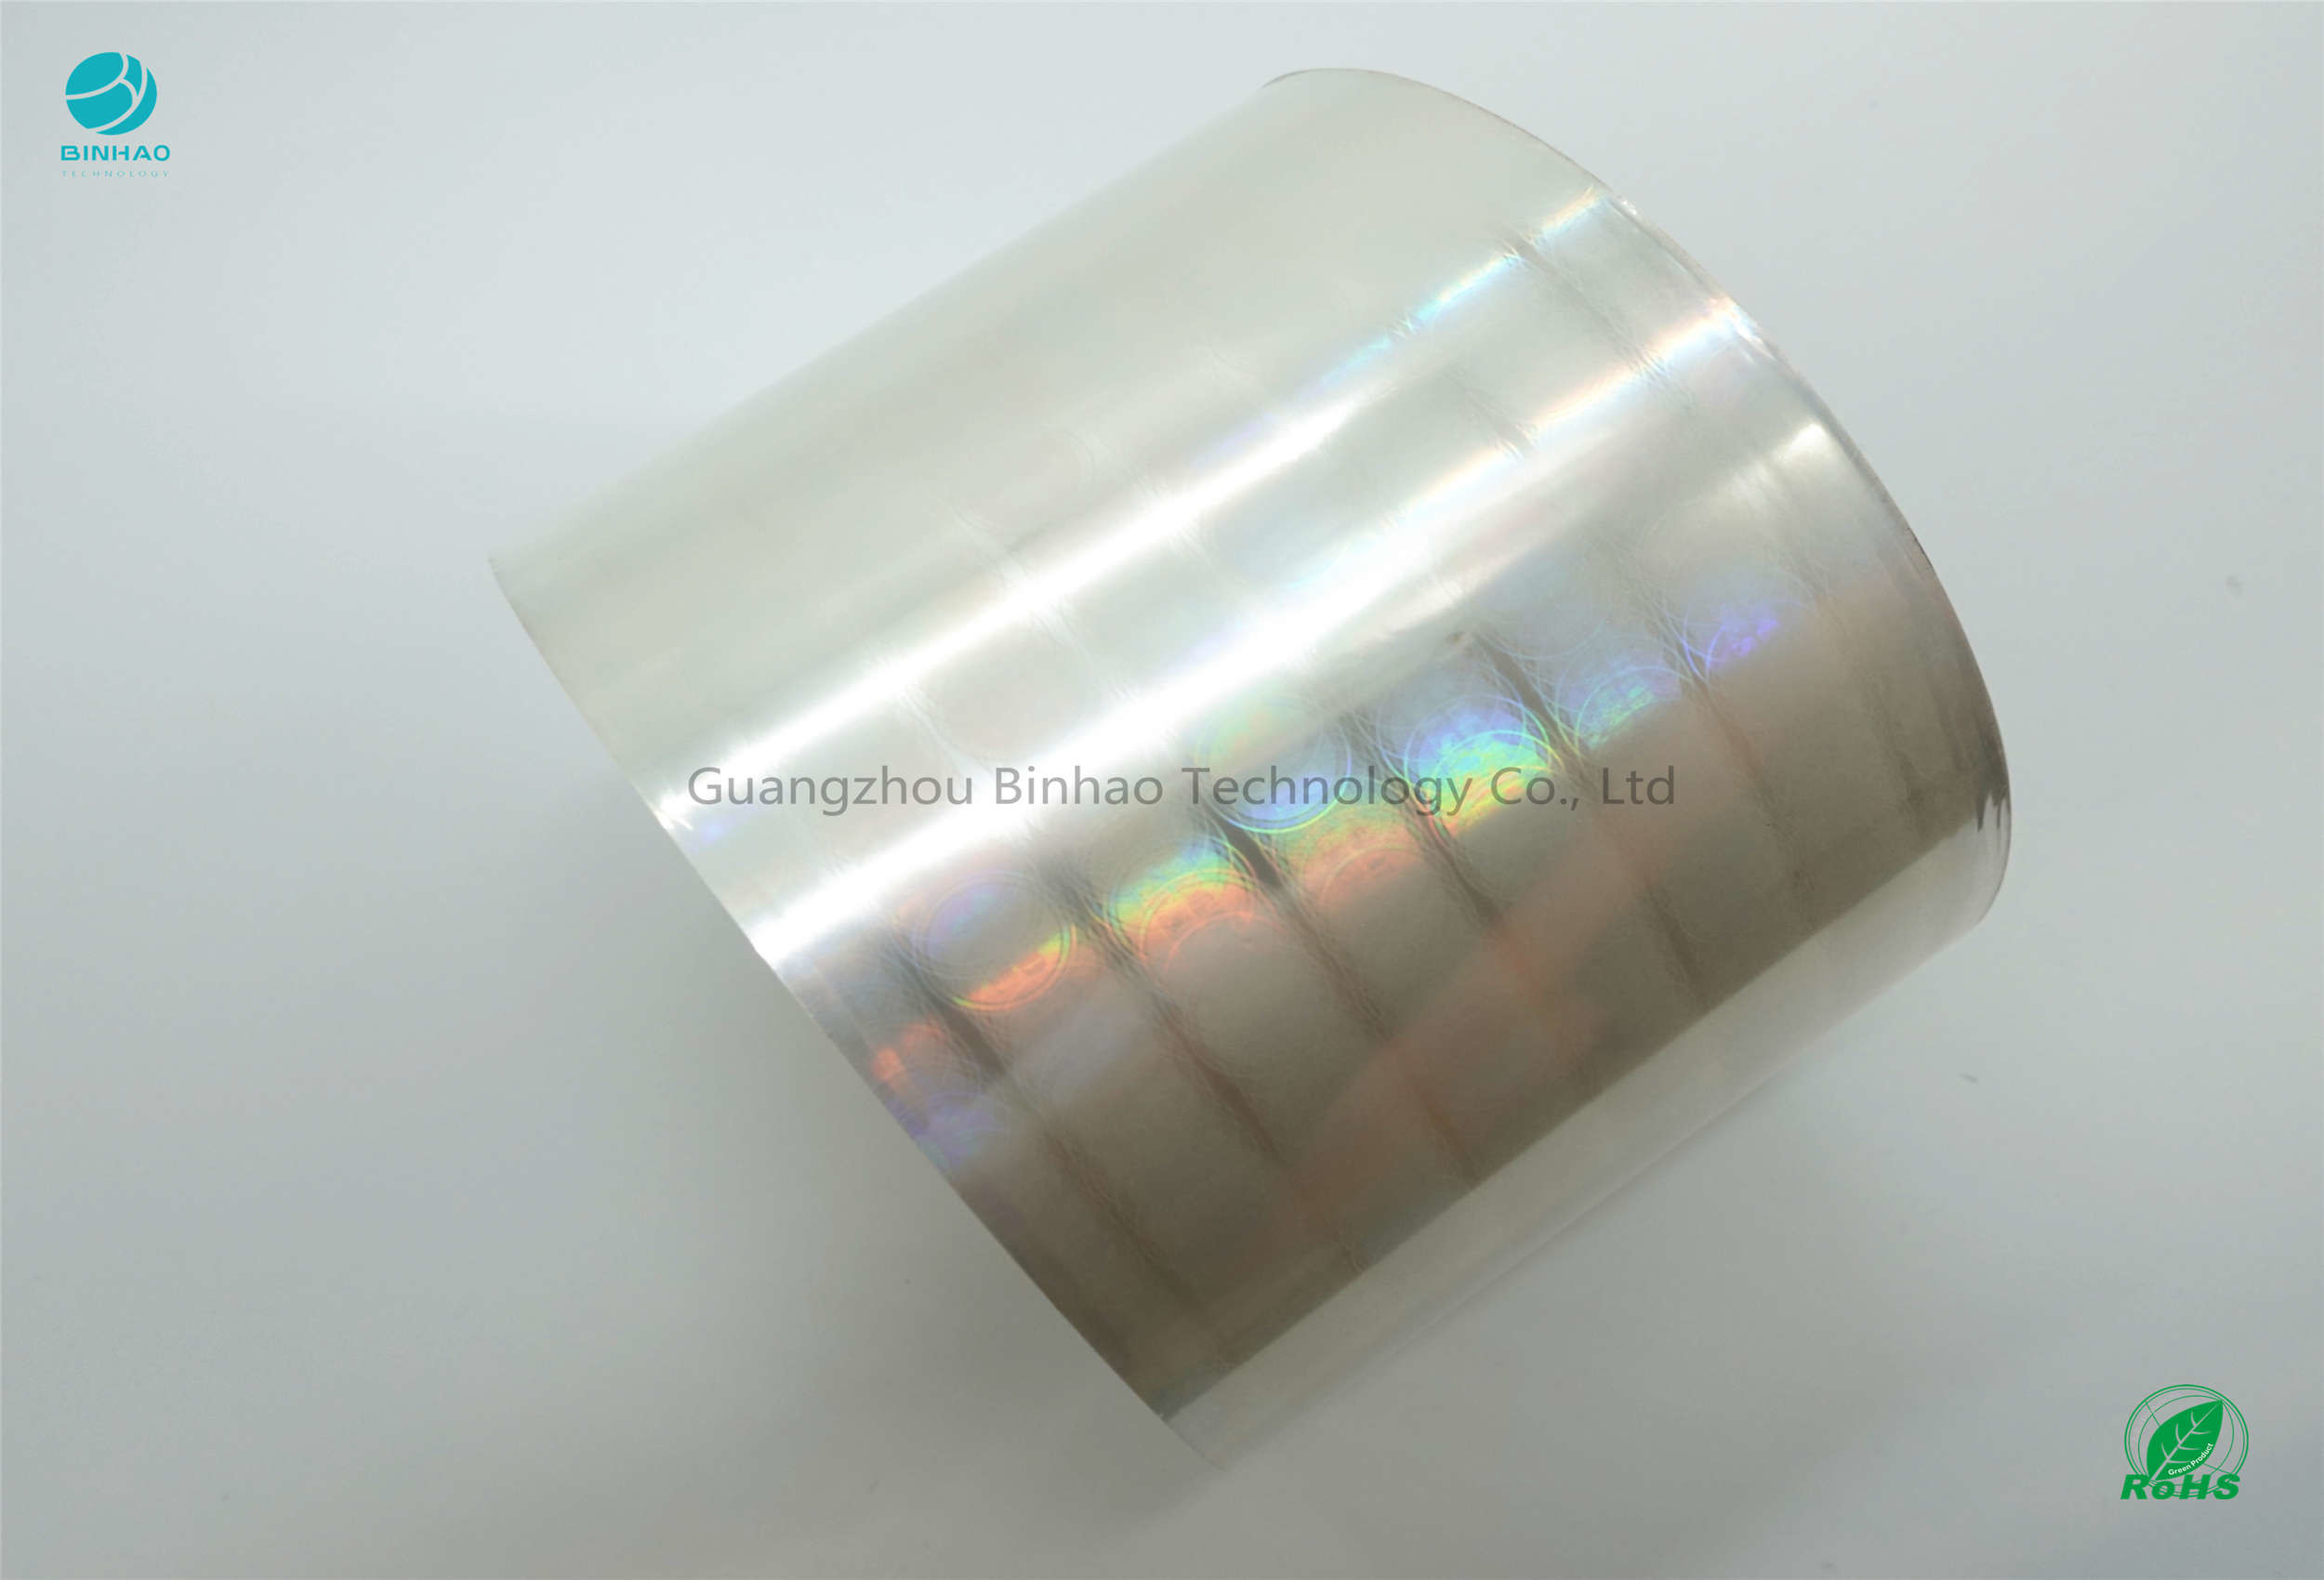 Fully Recyclable BOPP Holographic Film Environmental Friendly For Tobacco Package